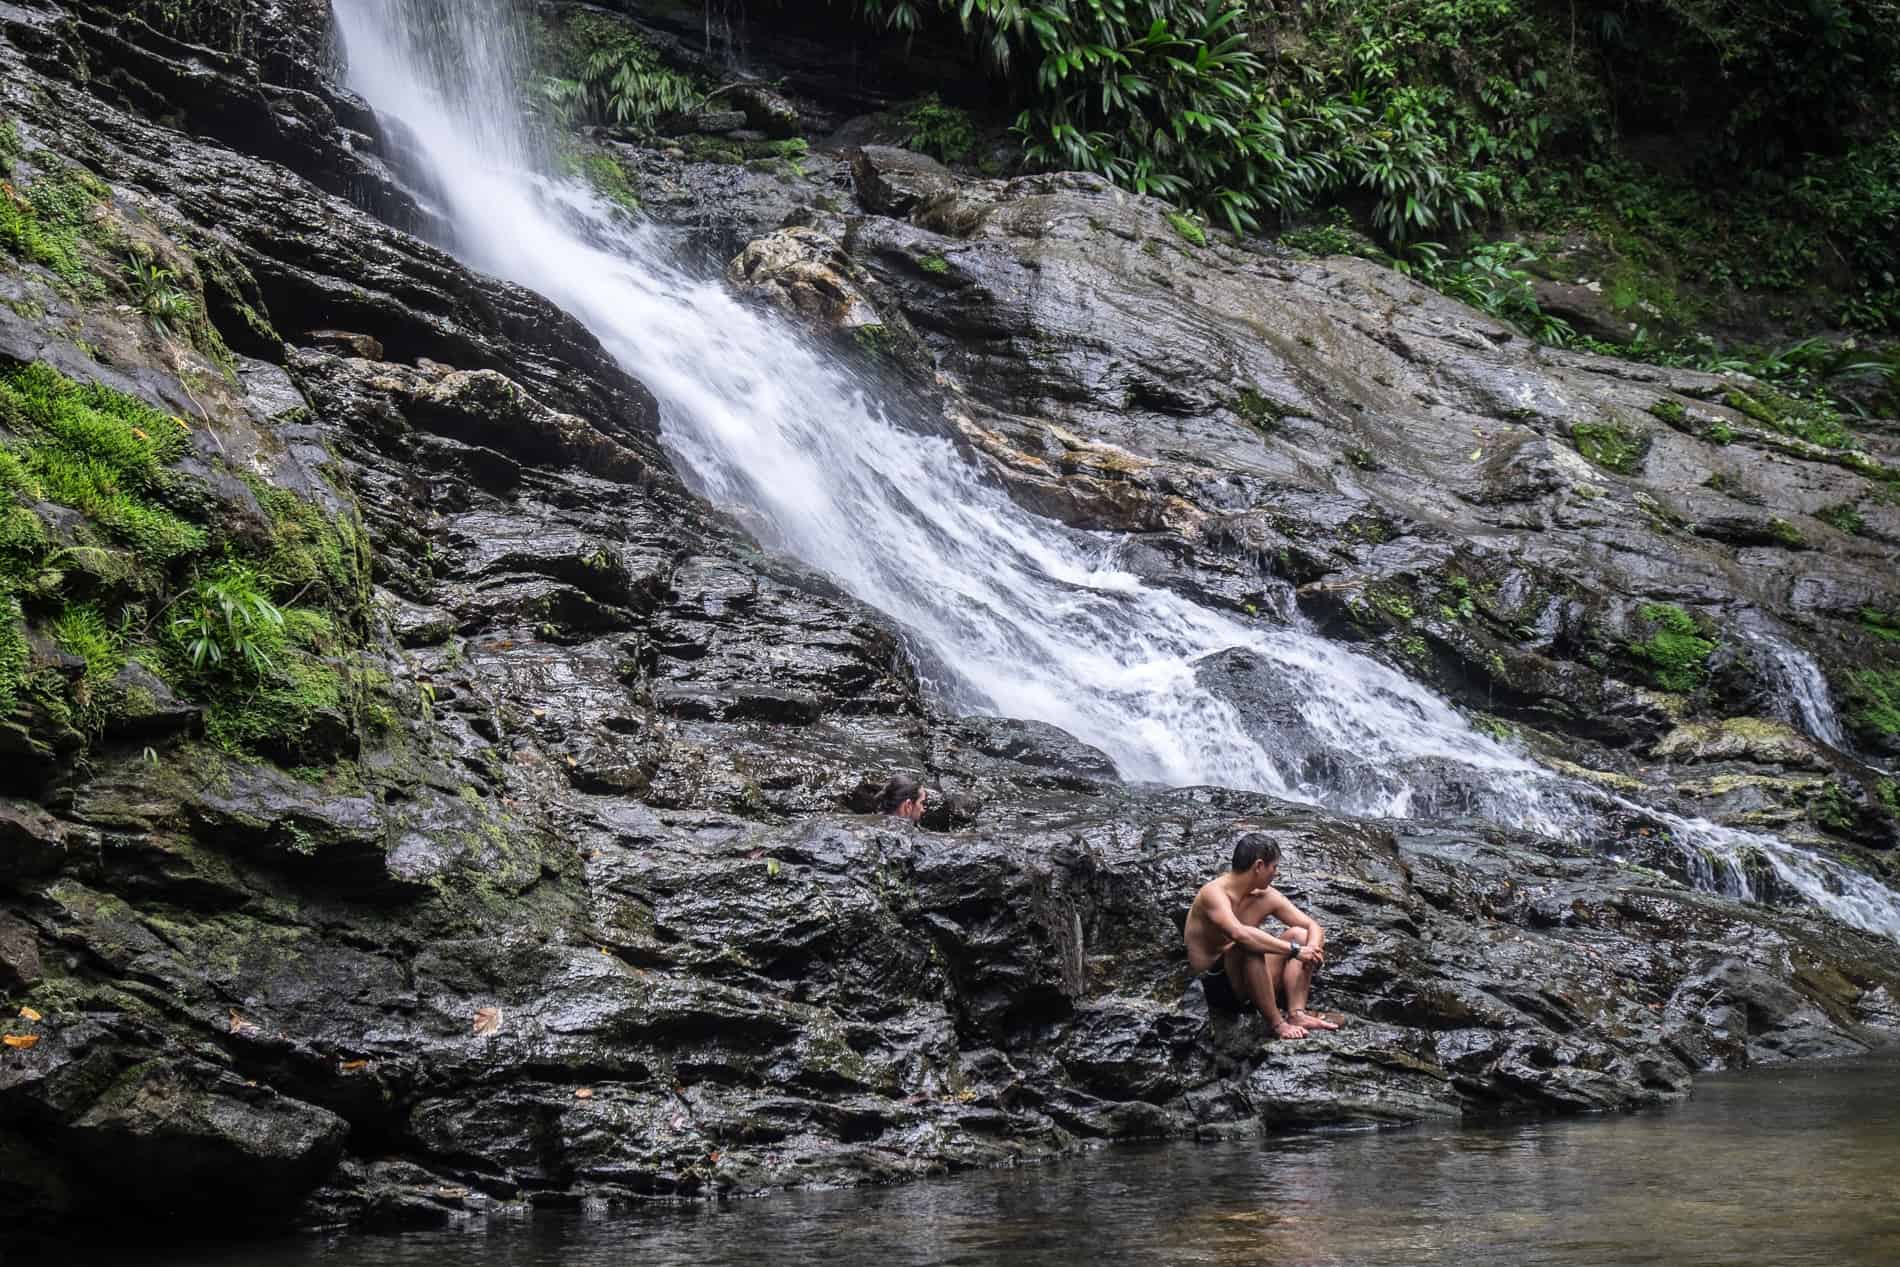 A man sitting on the rocks of a waterfall on the Lost City Trek.